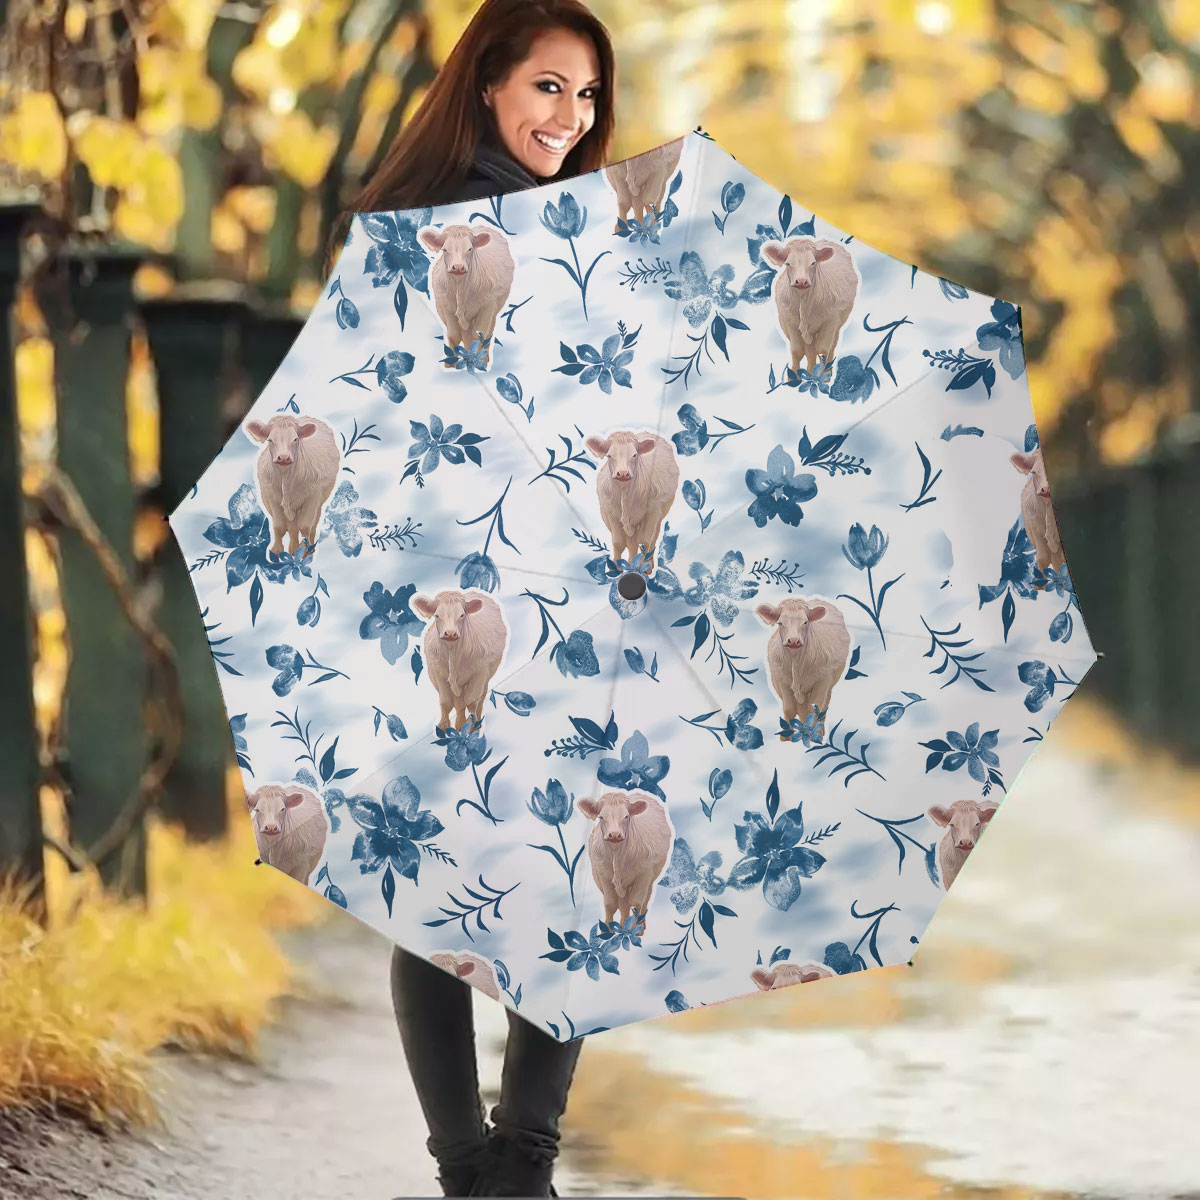 Charolais Watercolor Flowers and Leaves Tie Dye Pattern Umbrella